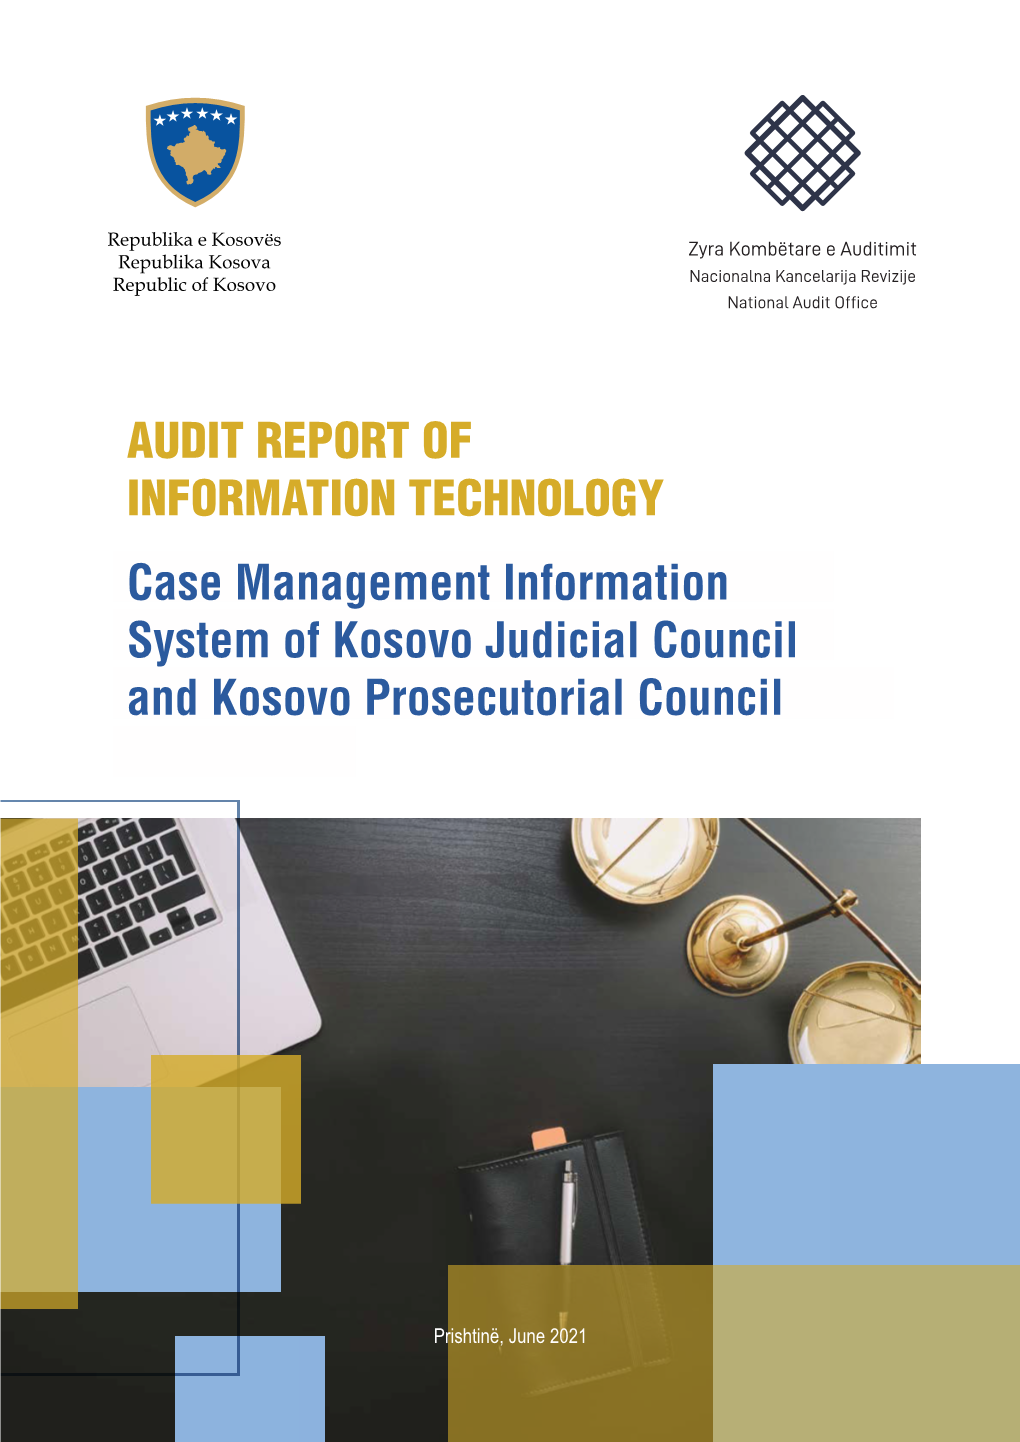 Case Management Information System of Kosovo Judicial Council and Kosovo Prosecutorial Council